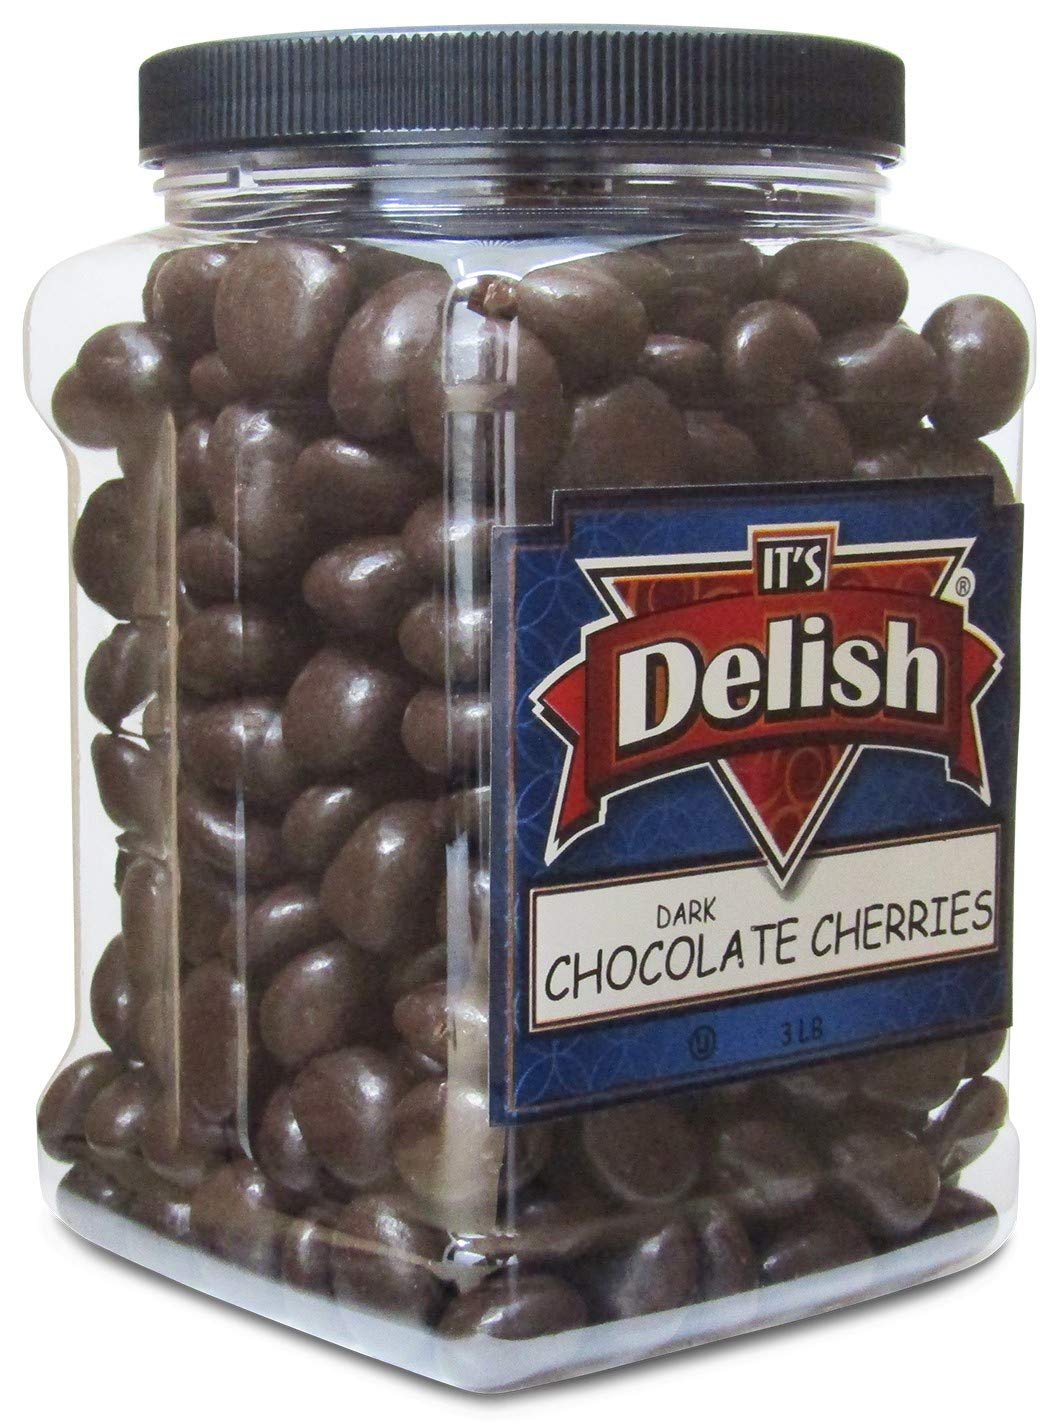 Gourmet Dark Chocolate Covered Blueberries - by It's Delish, 3 LBS